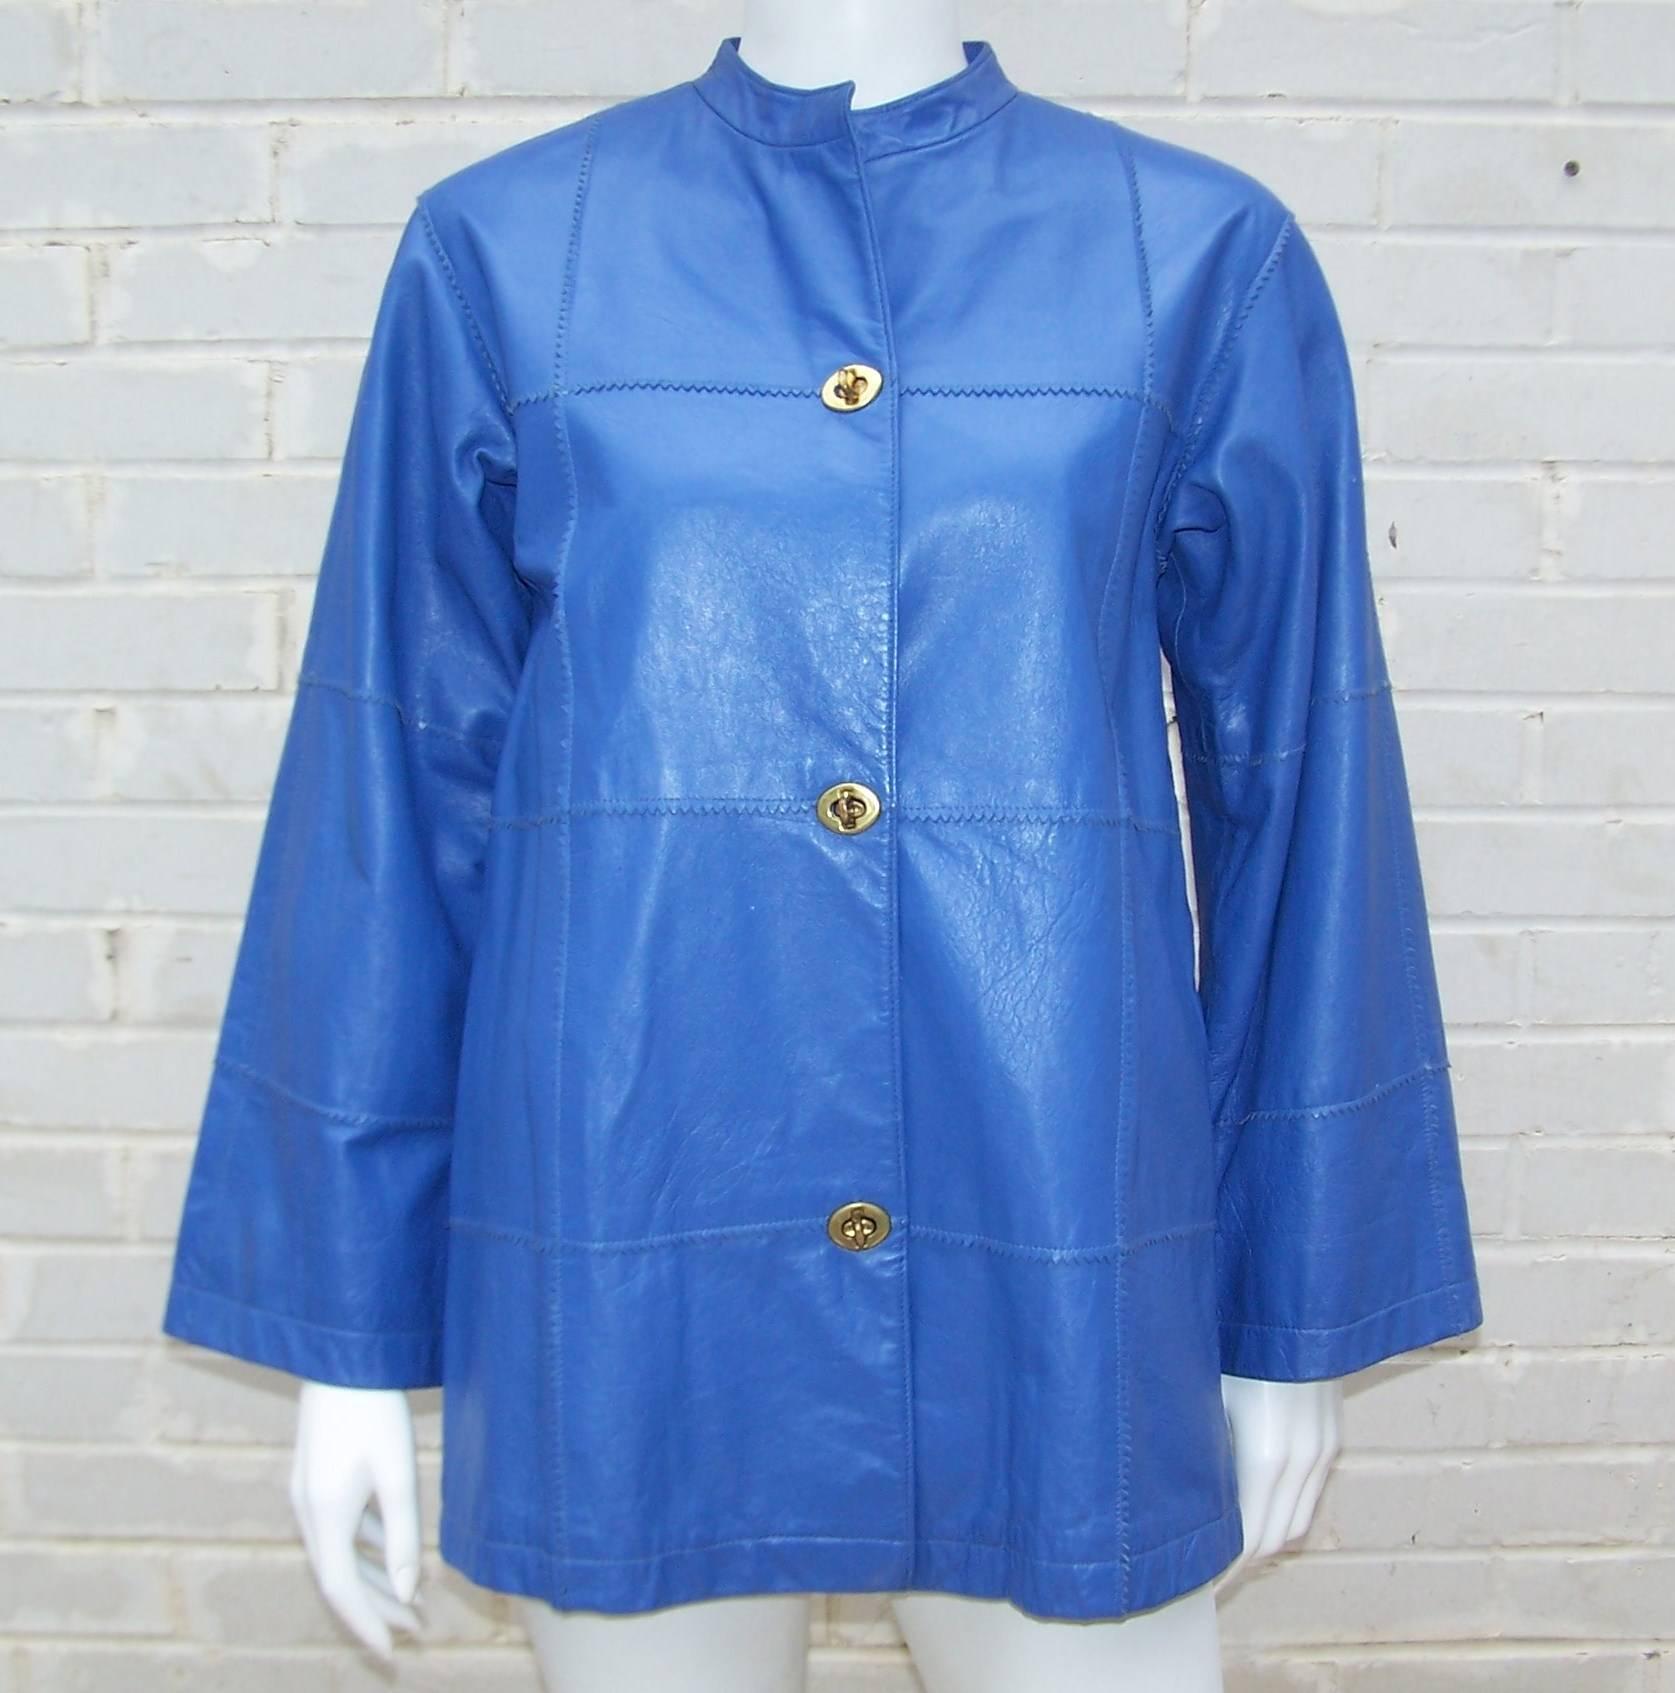 This brilliant periwinkle blue leather jacket is by quintessential American designer, Bonnie Cashin.  Designed for Sills c.1970, the jacket originally retailed at Saks Fifth Avenue and features pinked patchwork panels, mandarin style collar, bell